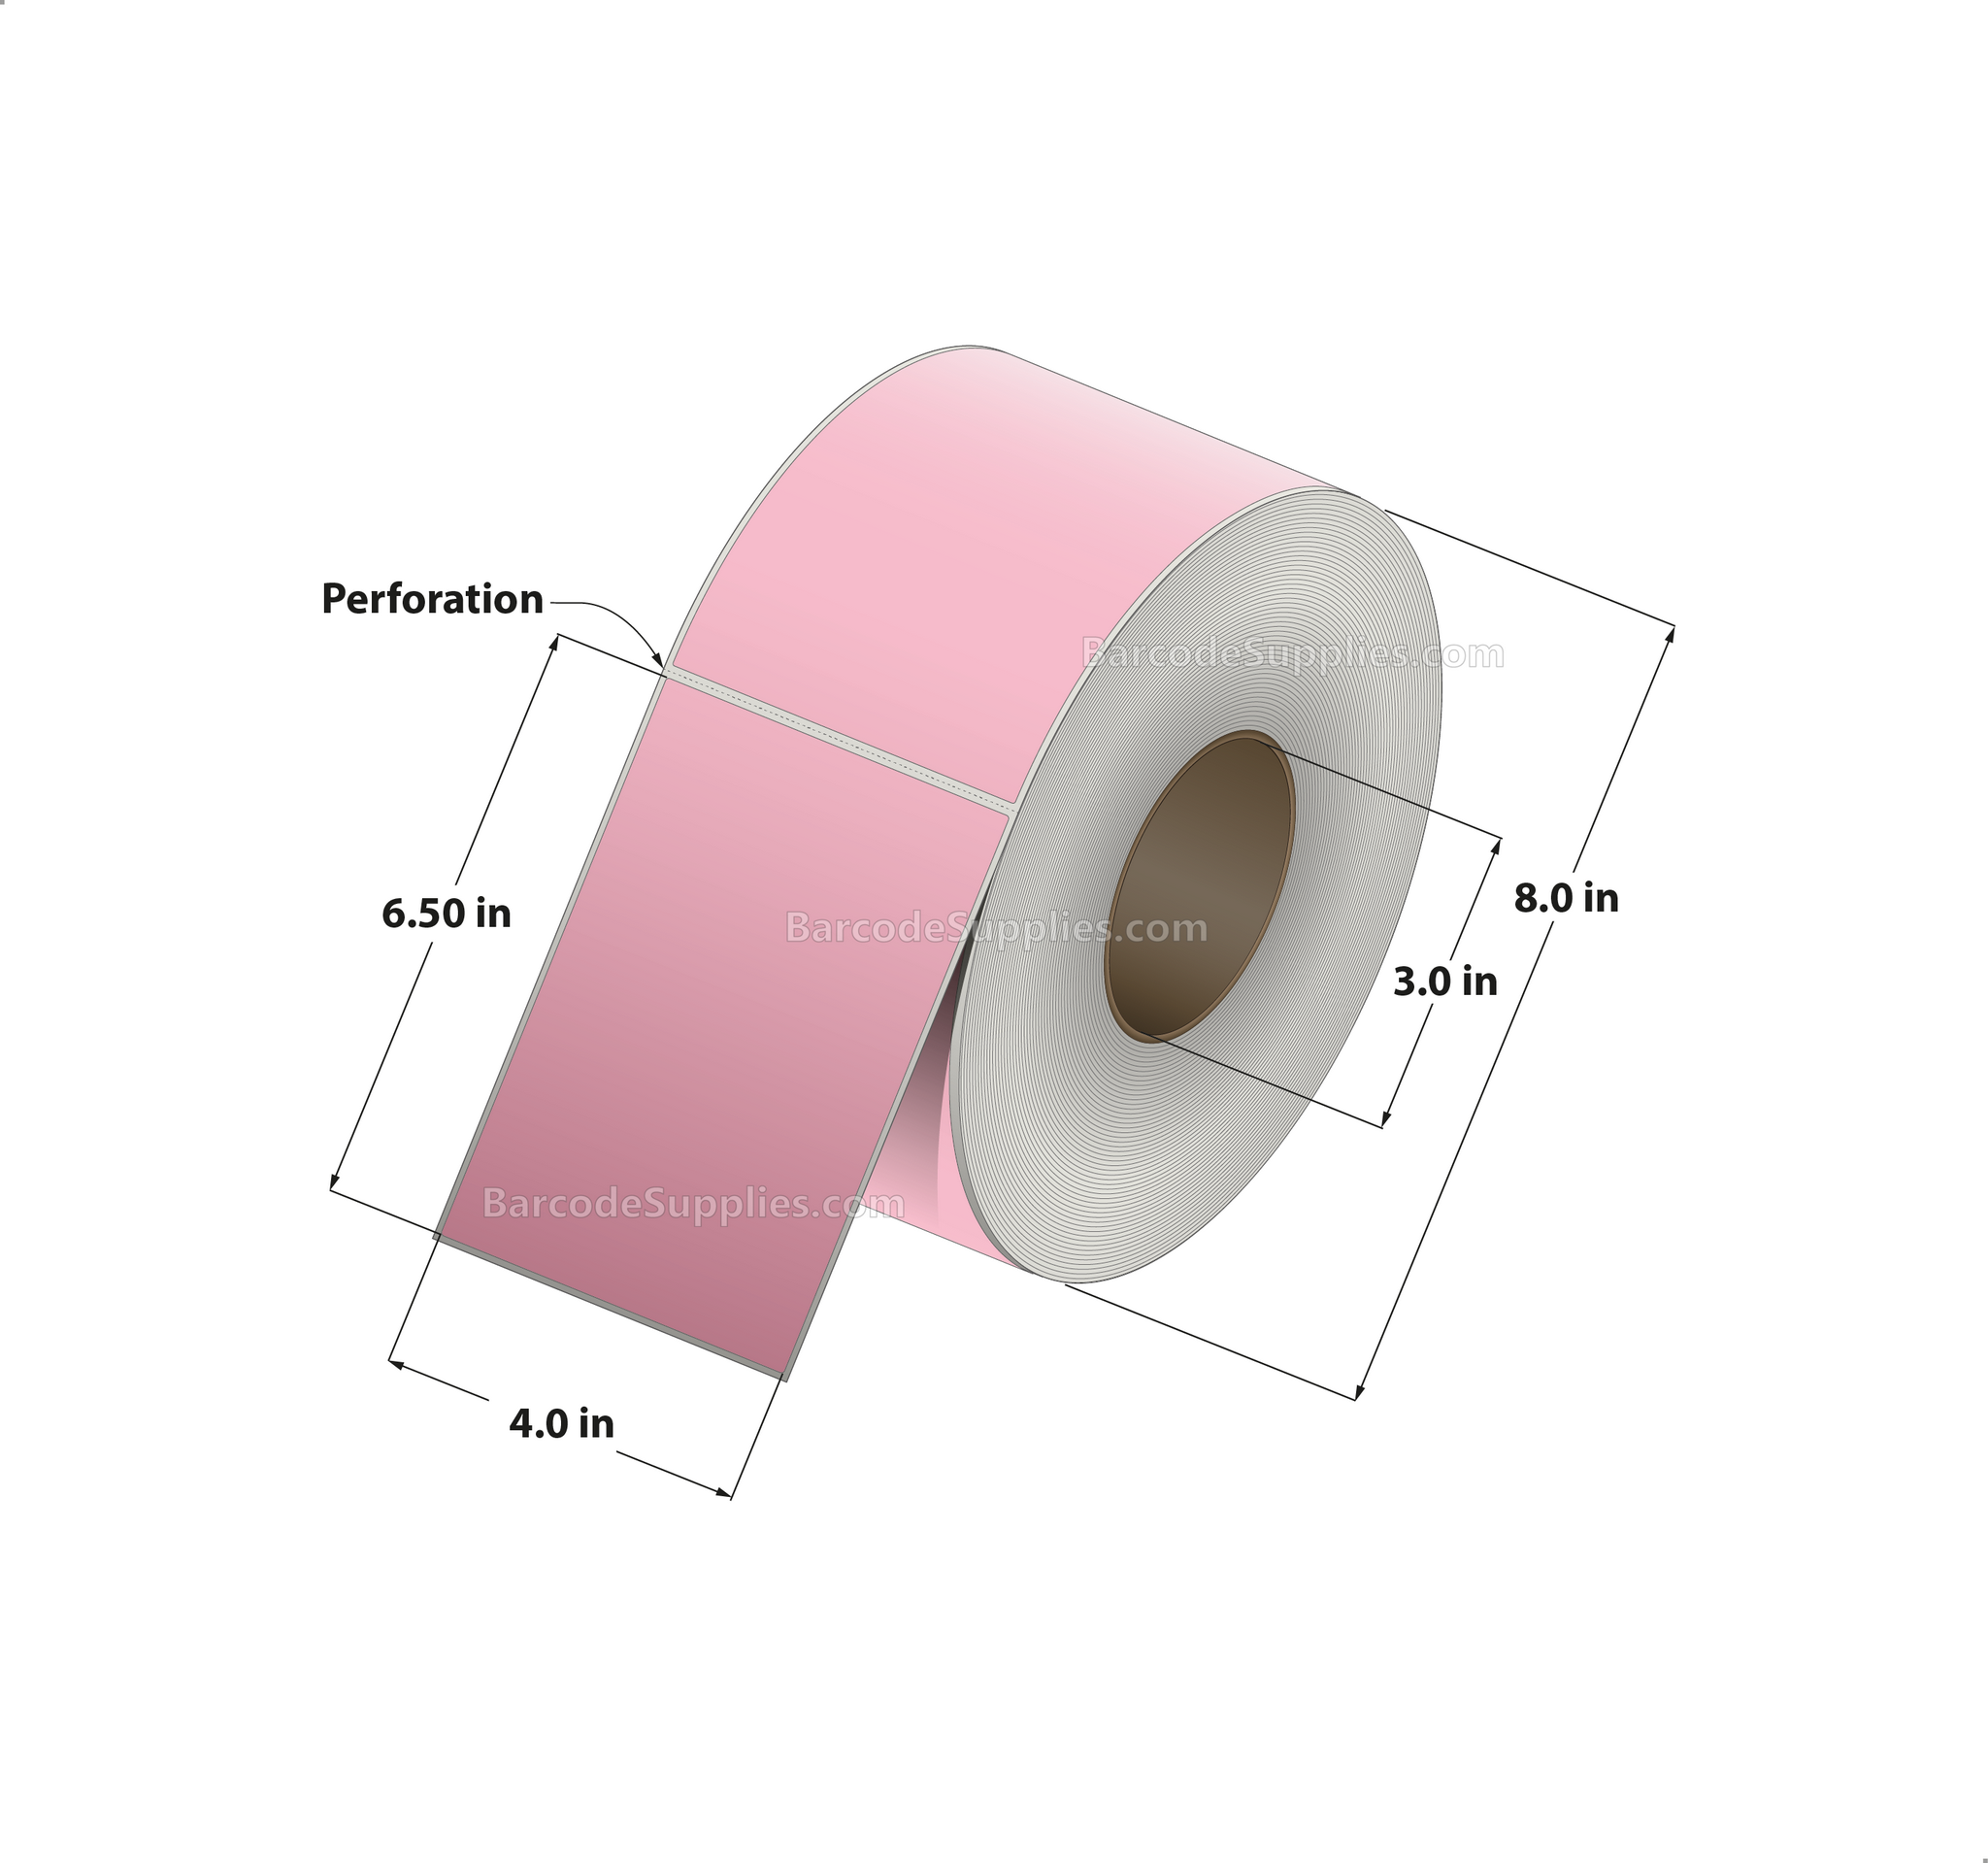 4 x 6.5 Thermal Transfer 176 Pink Labels With Permanent Adhesive - Perforated - 900 Labels Per Roll - Carton Of 4 Rolls - 3600 Labels Total - MPN: RFC-4-65-900-PK